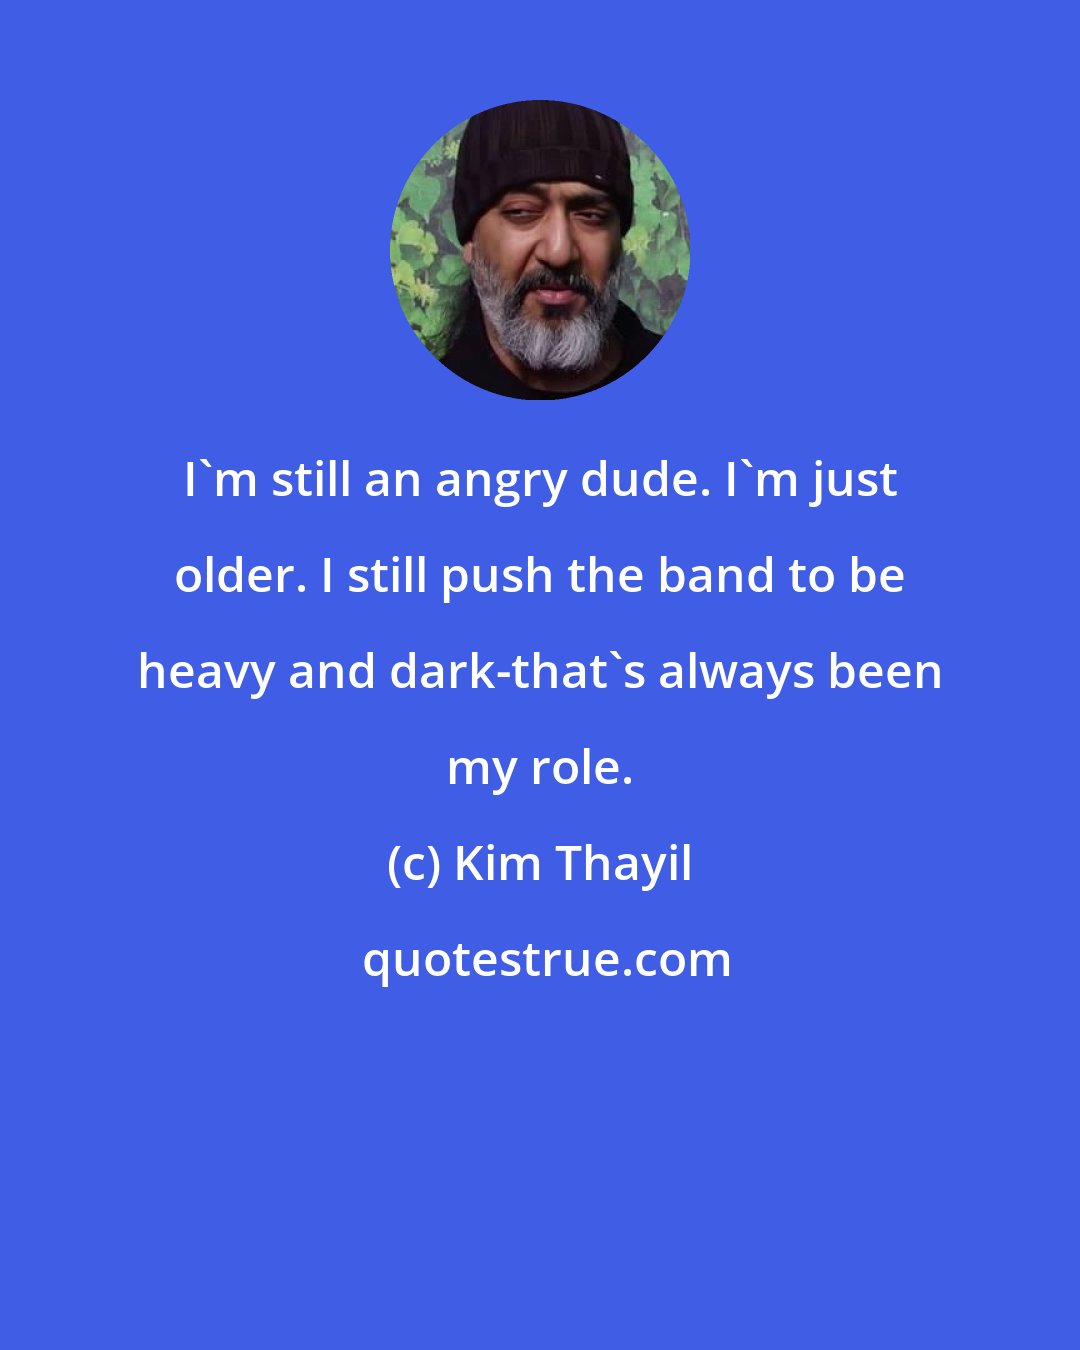 Kim Thayil: I'm still an angry dude. I'm just older. I still push the band to be heavy and dark-that's always been my role.